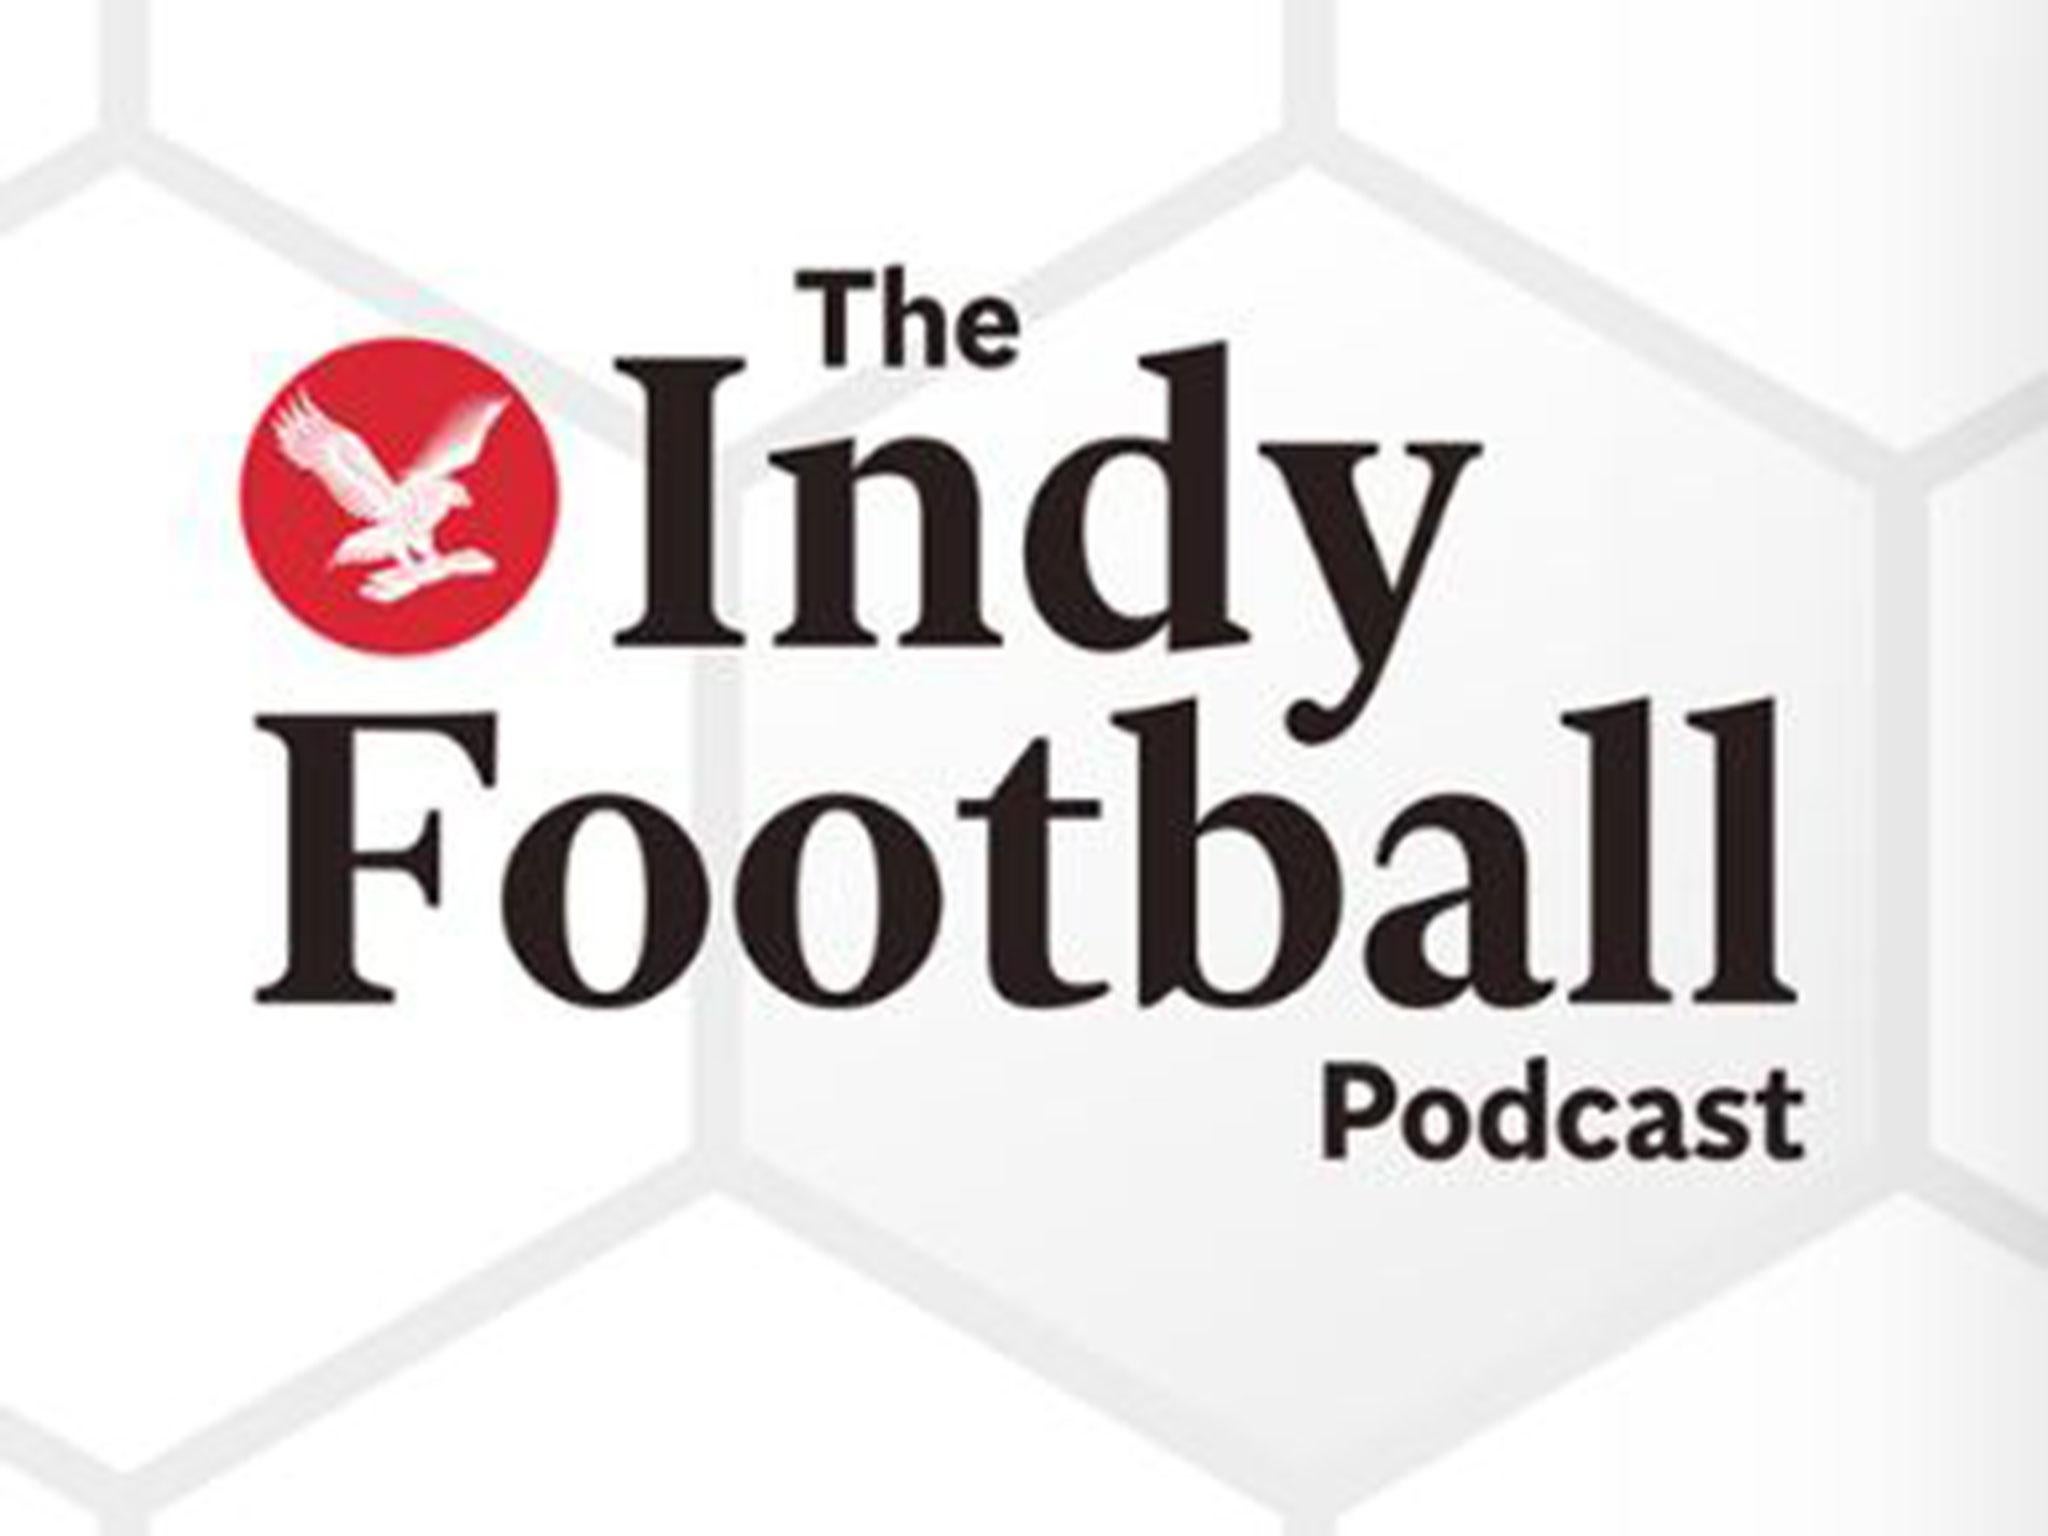 Indy Football Podcast - World Cup daily: Argentina&apos;s brilliant comeback, Lionel Messi&apos;s sublime goal and more